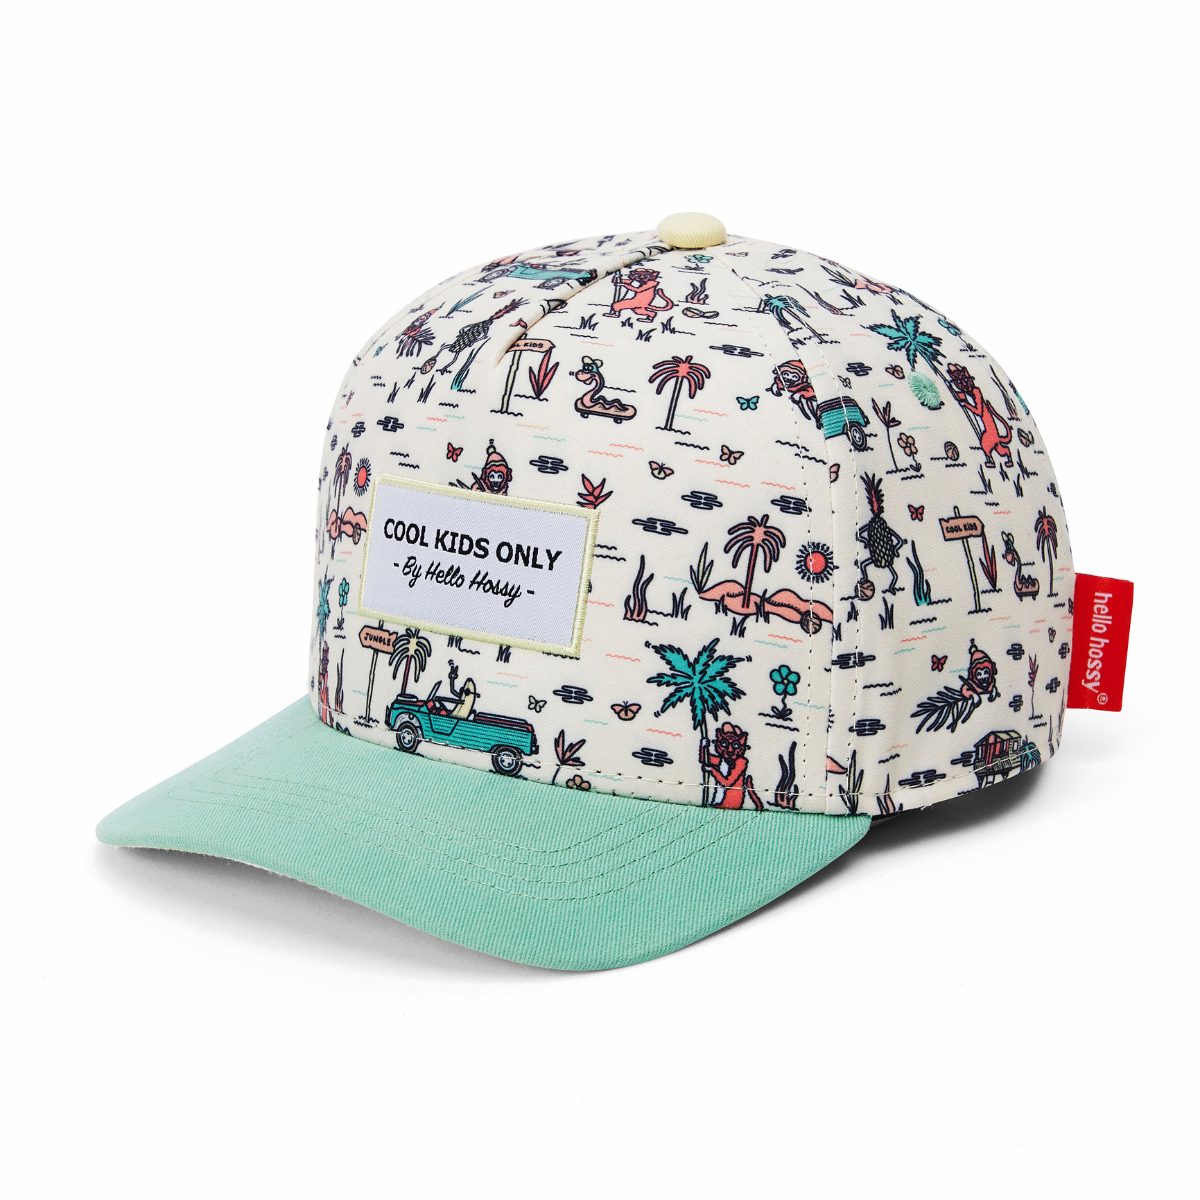 HELLO HOSSY – Casquette Jungly.